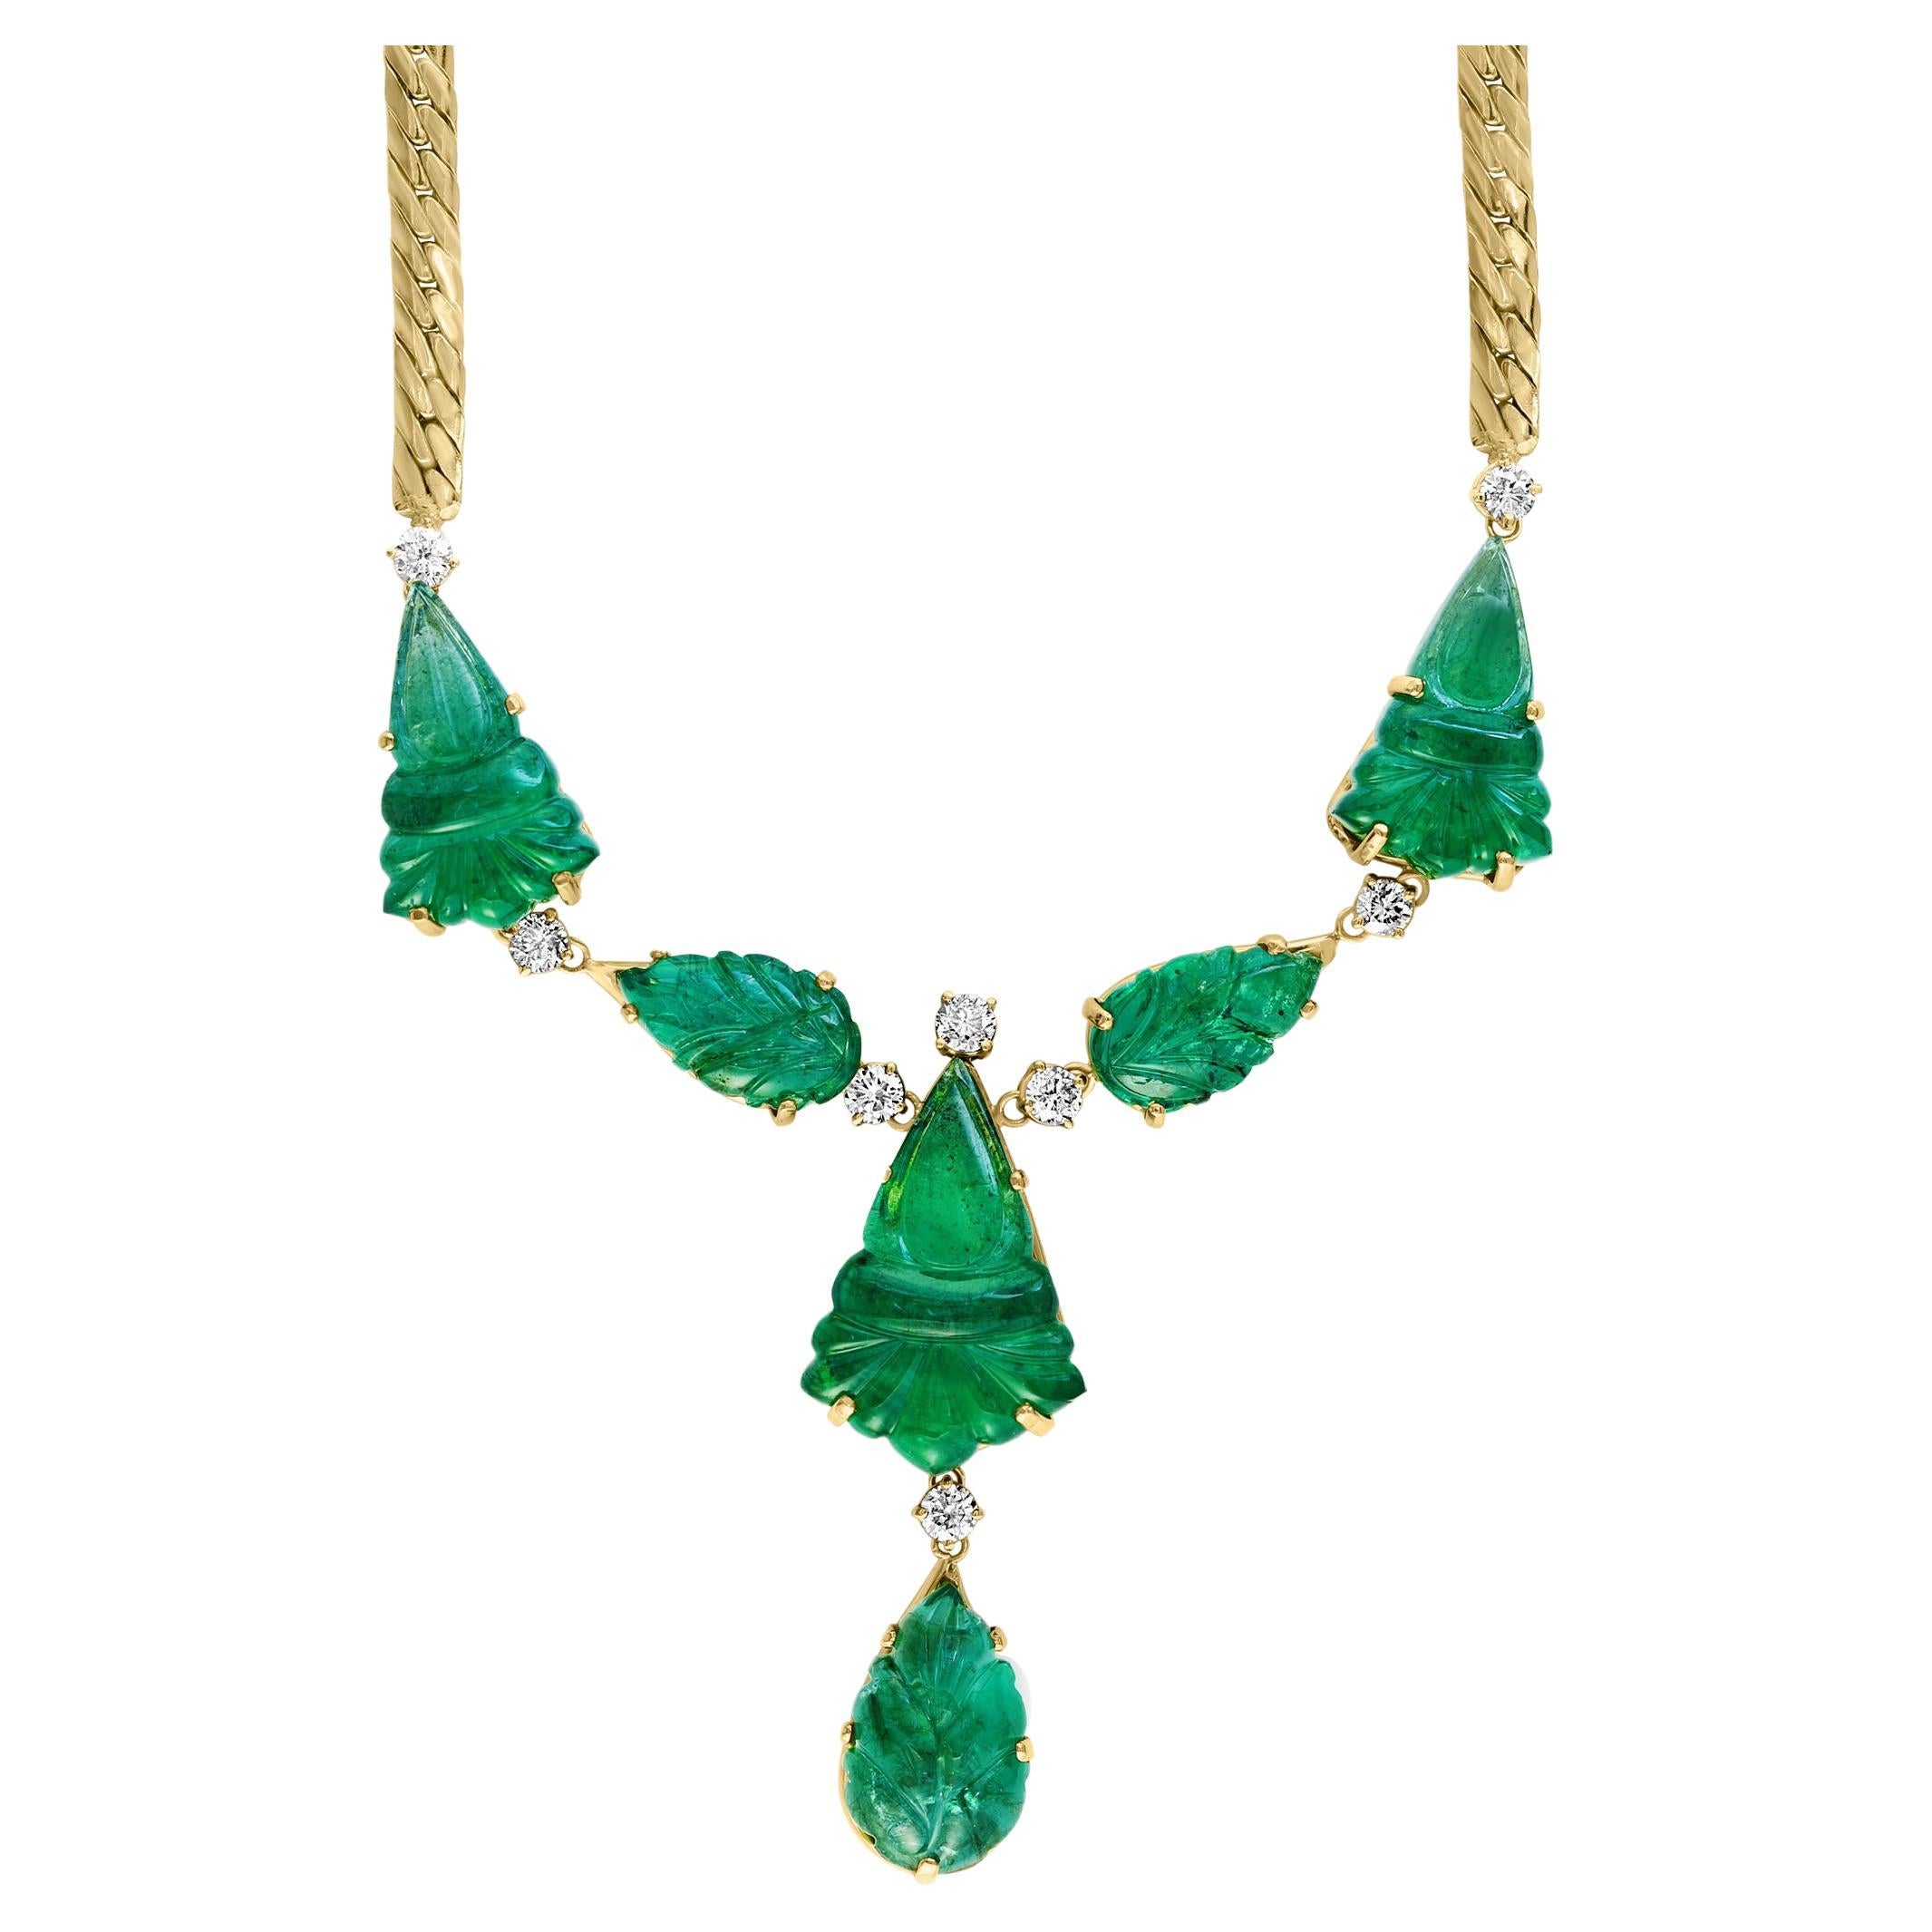 115 Ct Natural Carved Drop Emerald & 4 Ct Diamond  Necklace 18 Kt Gold Necklace For Sale